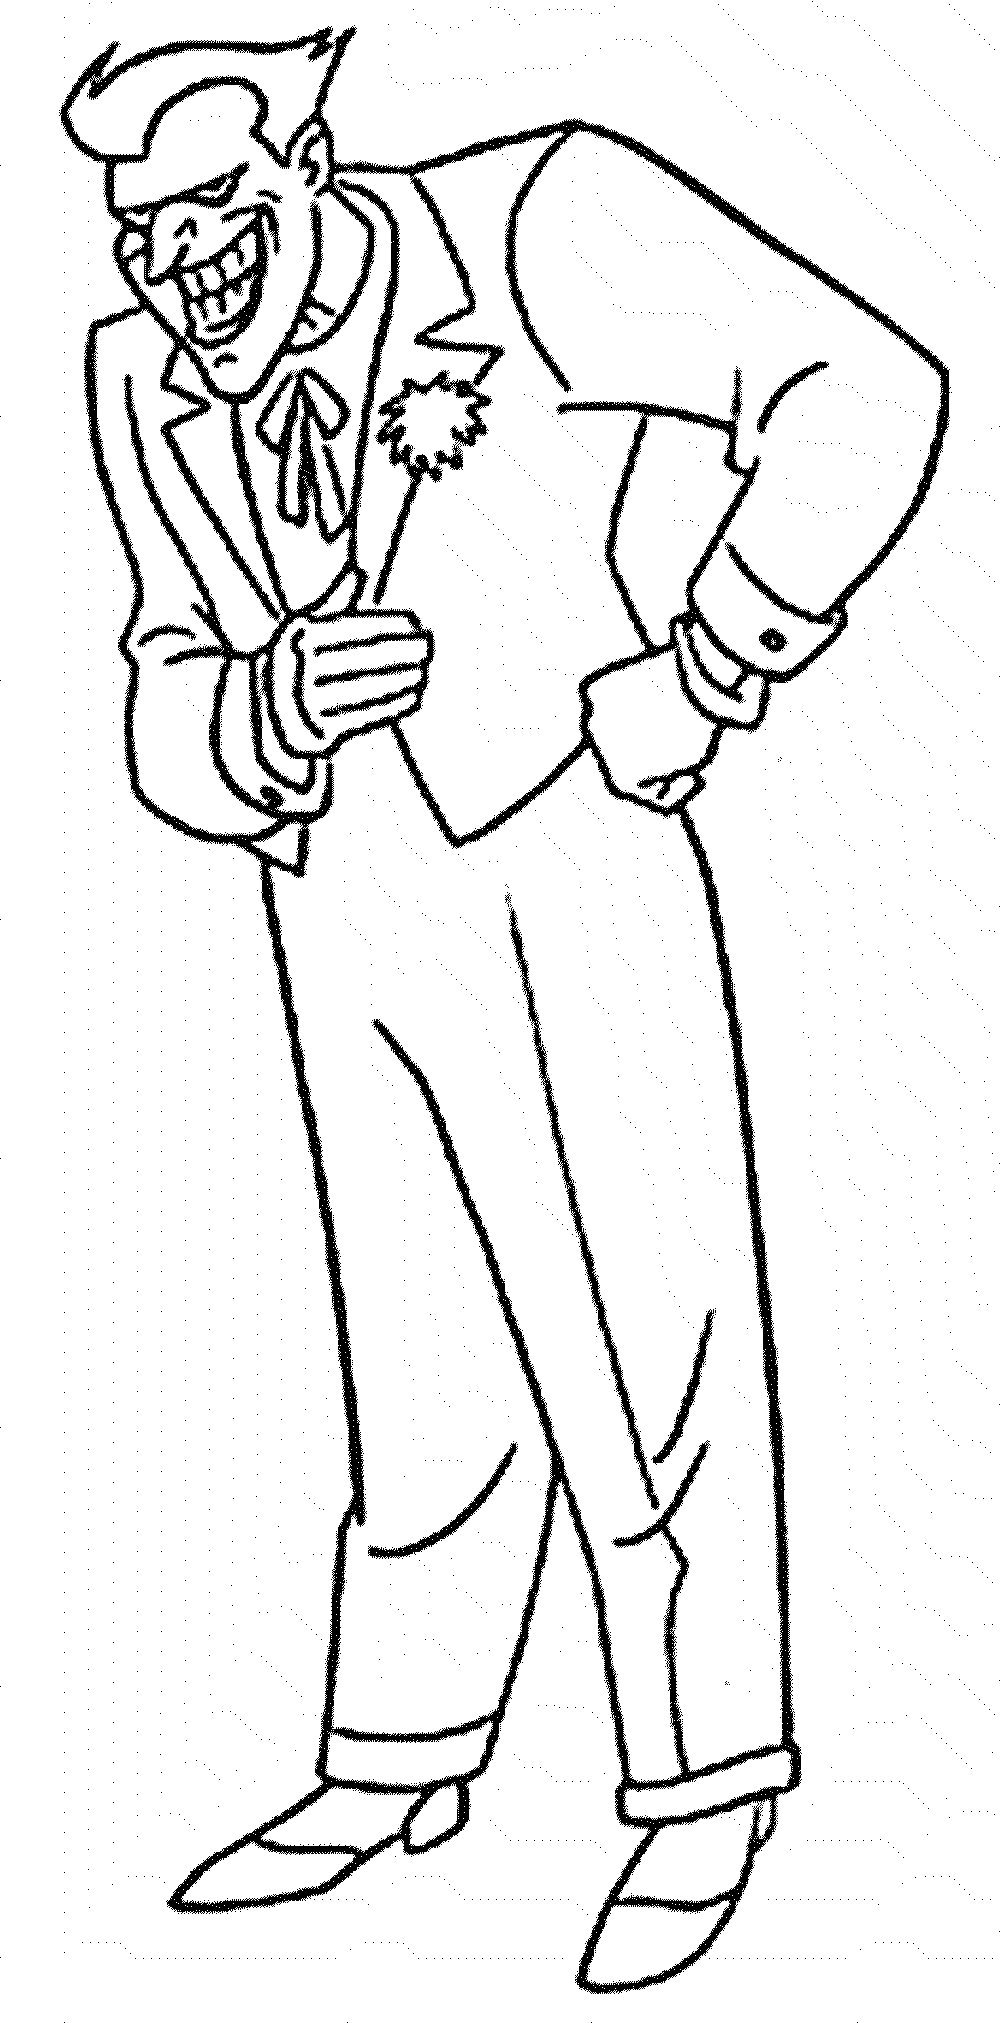 Joker coloring pages to download and print for free